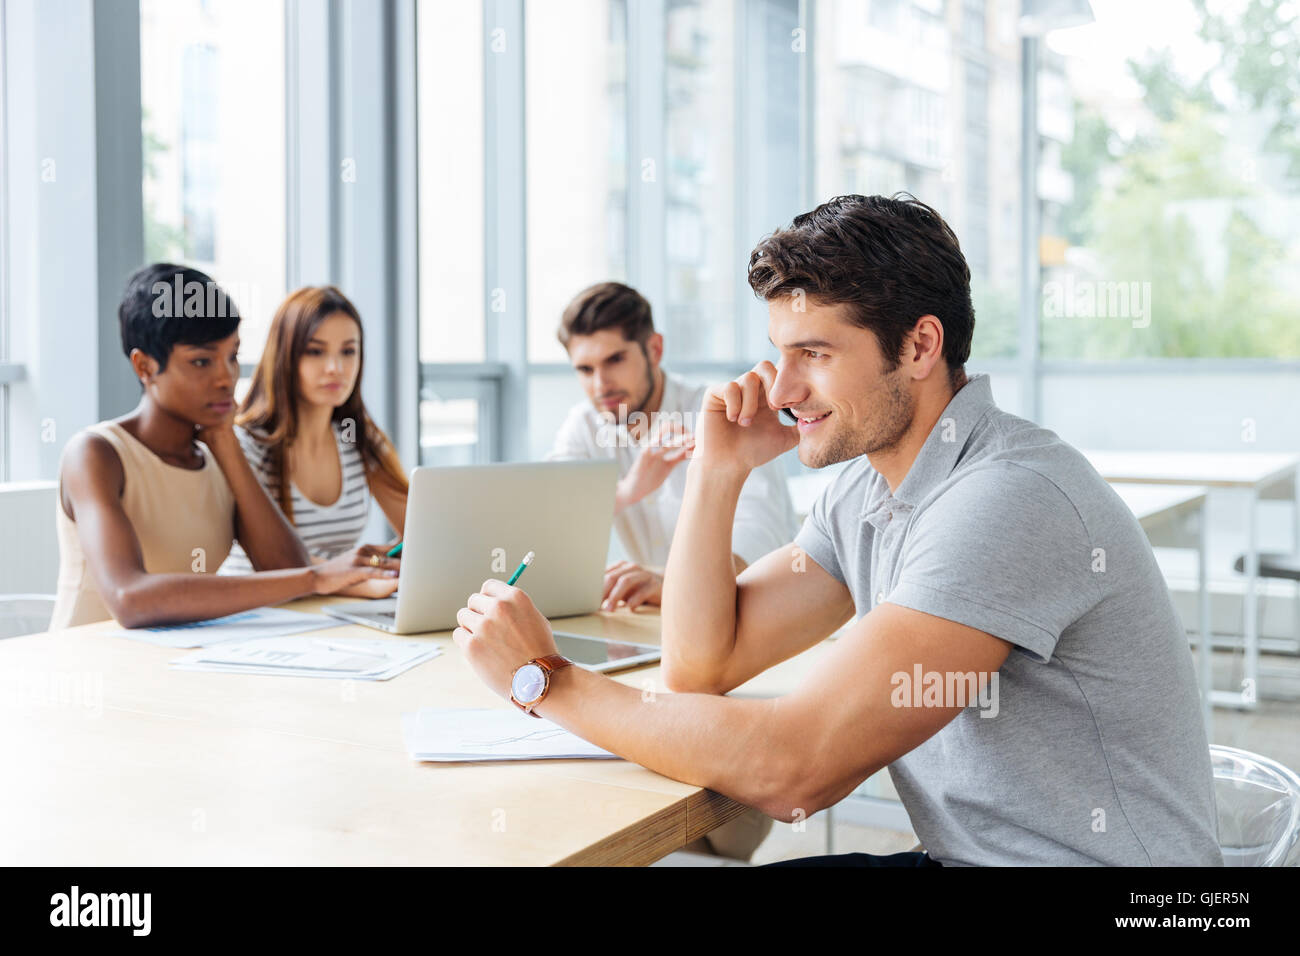 Successful young businessman talking on cell phone on business meeting in conference room Stock Photo